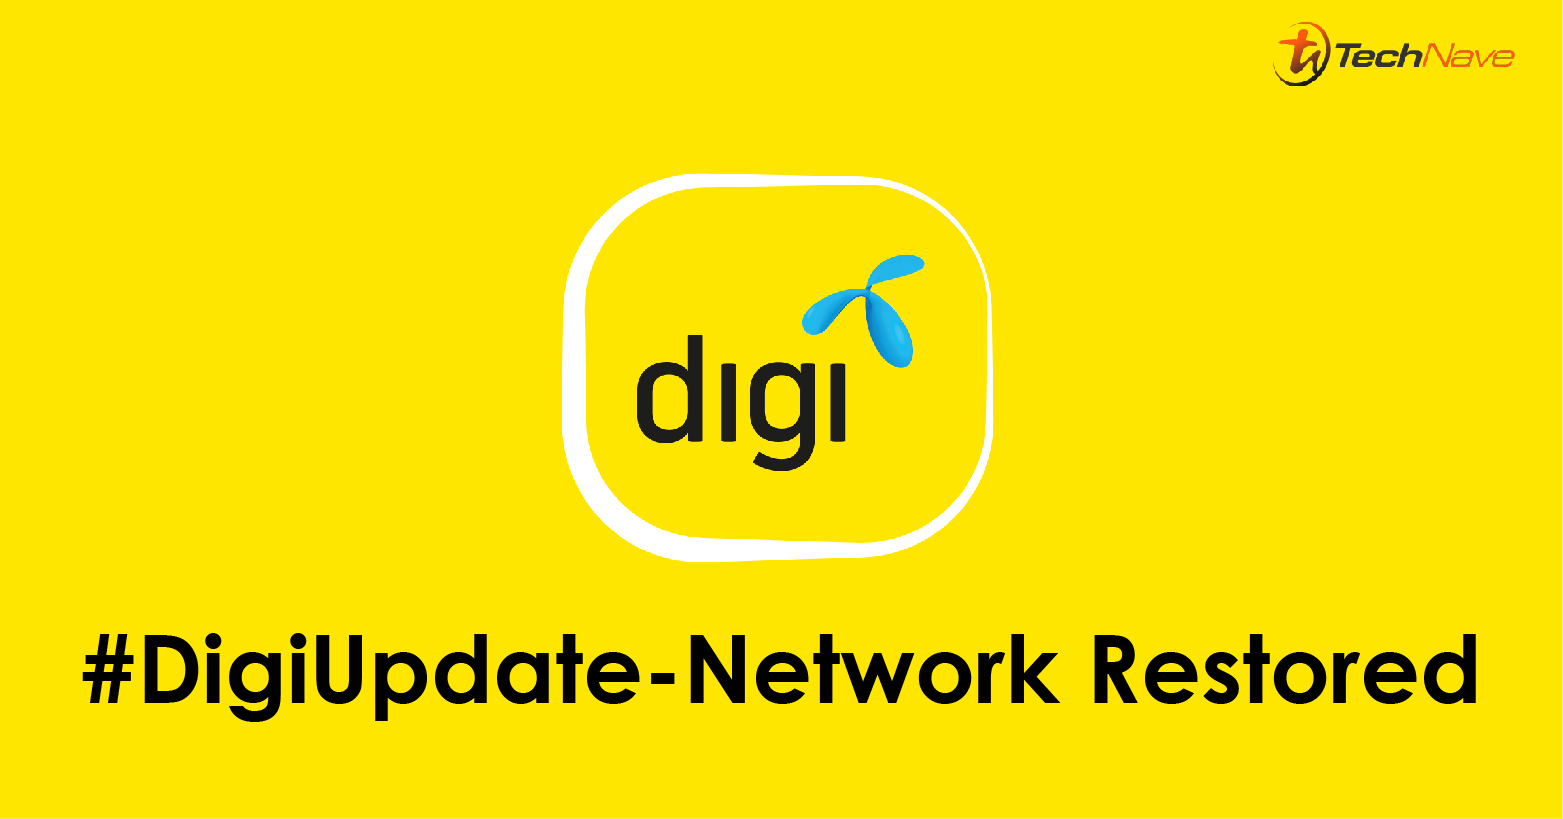 #DigiUpdate - Network service issue returns to normal